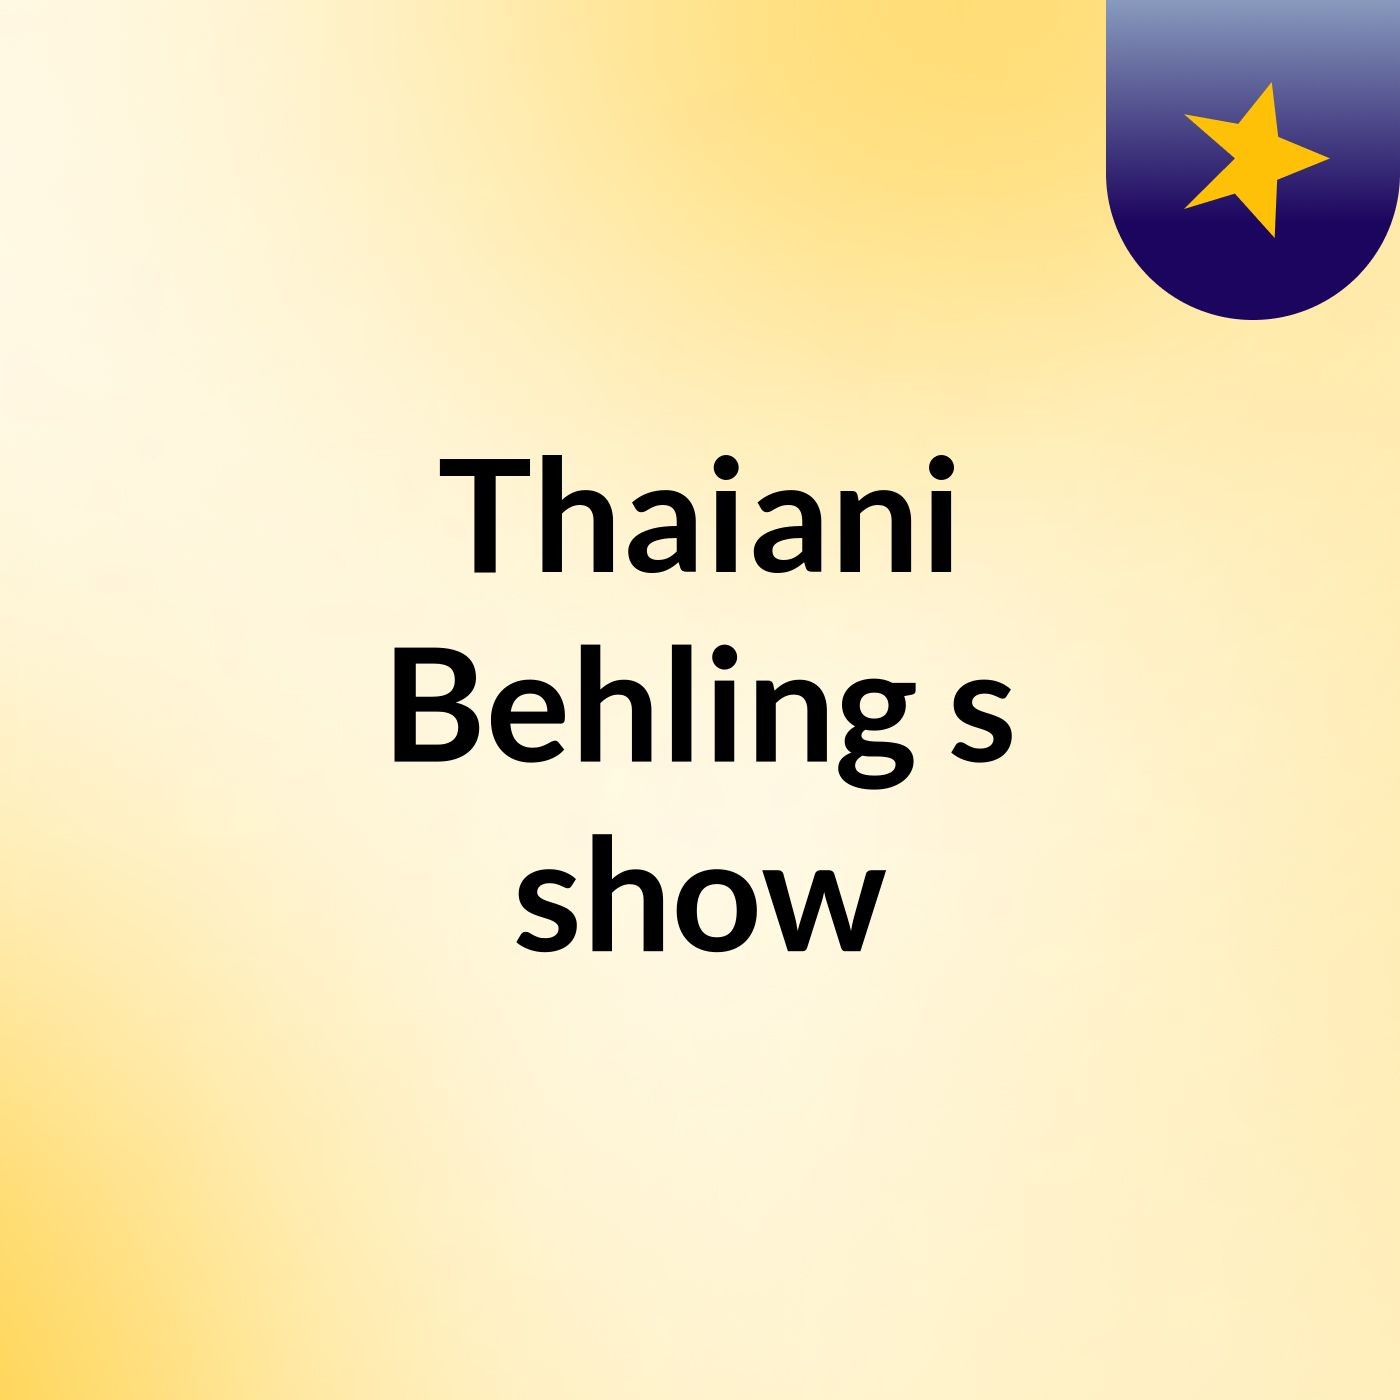 Thaiani Behling's show